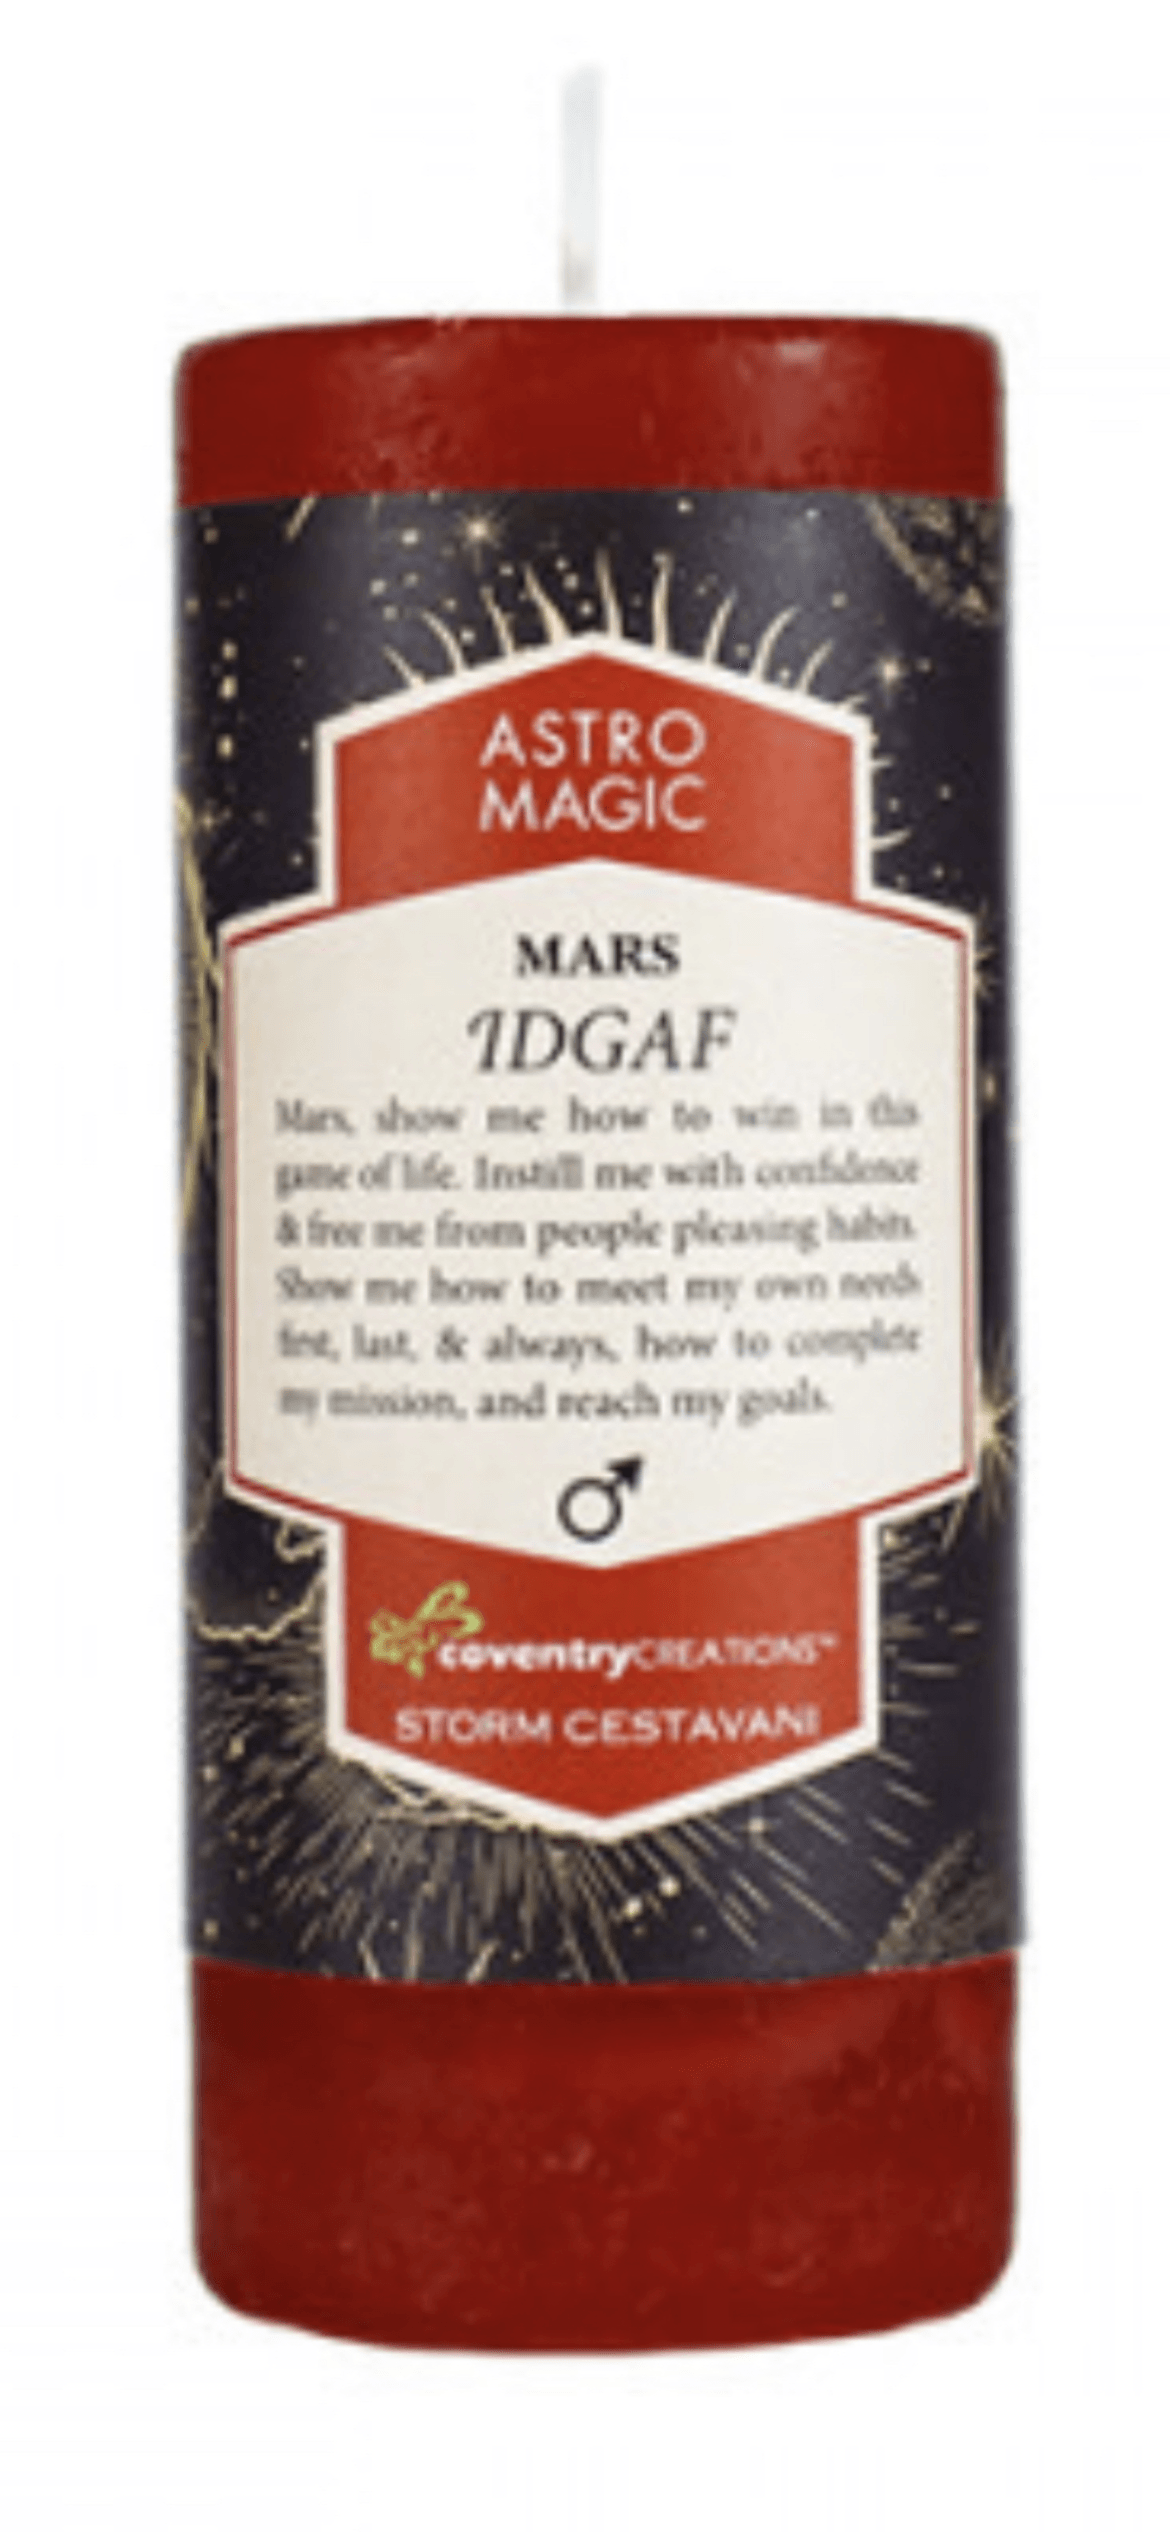 Astro Magic Candle MARS IDGAF Blessed Herbal Spell Candle - Muse Crystals & Mystical Gifts